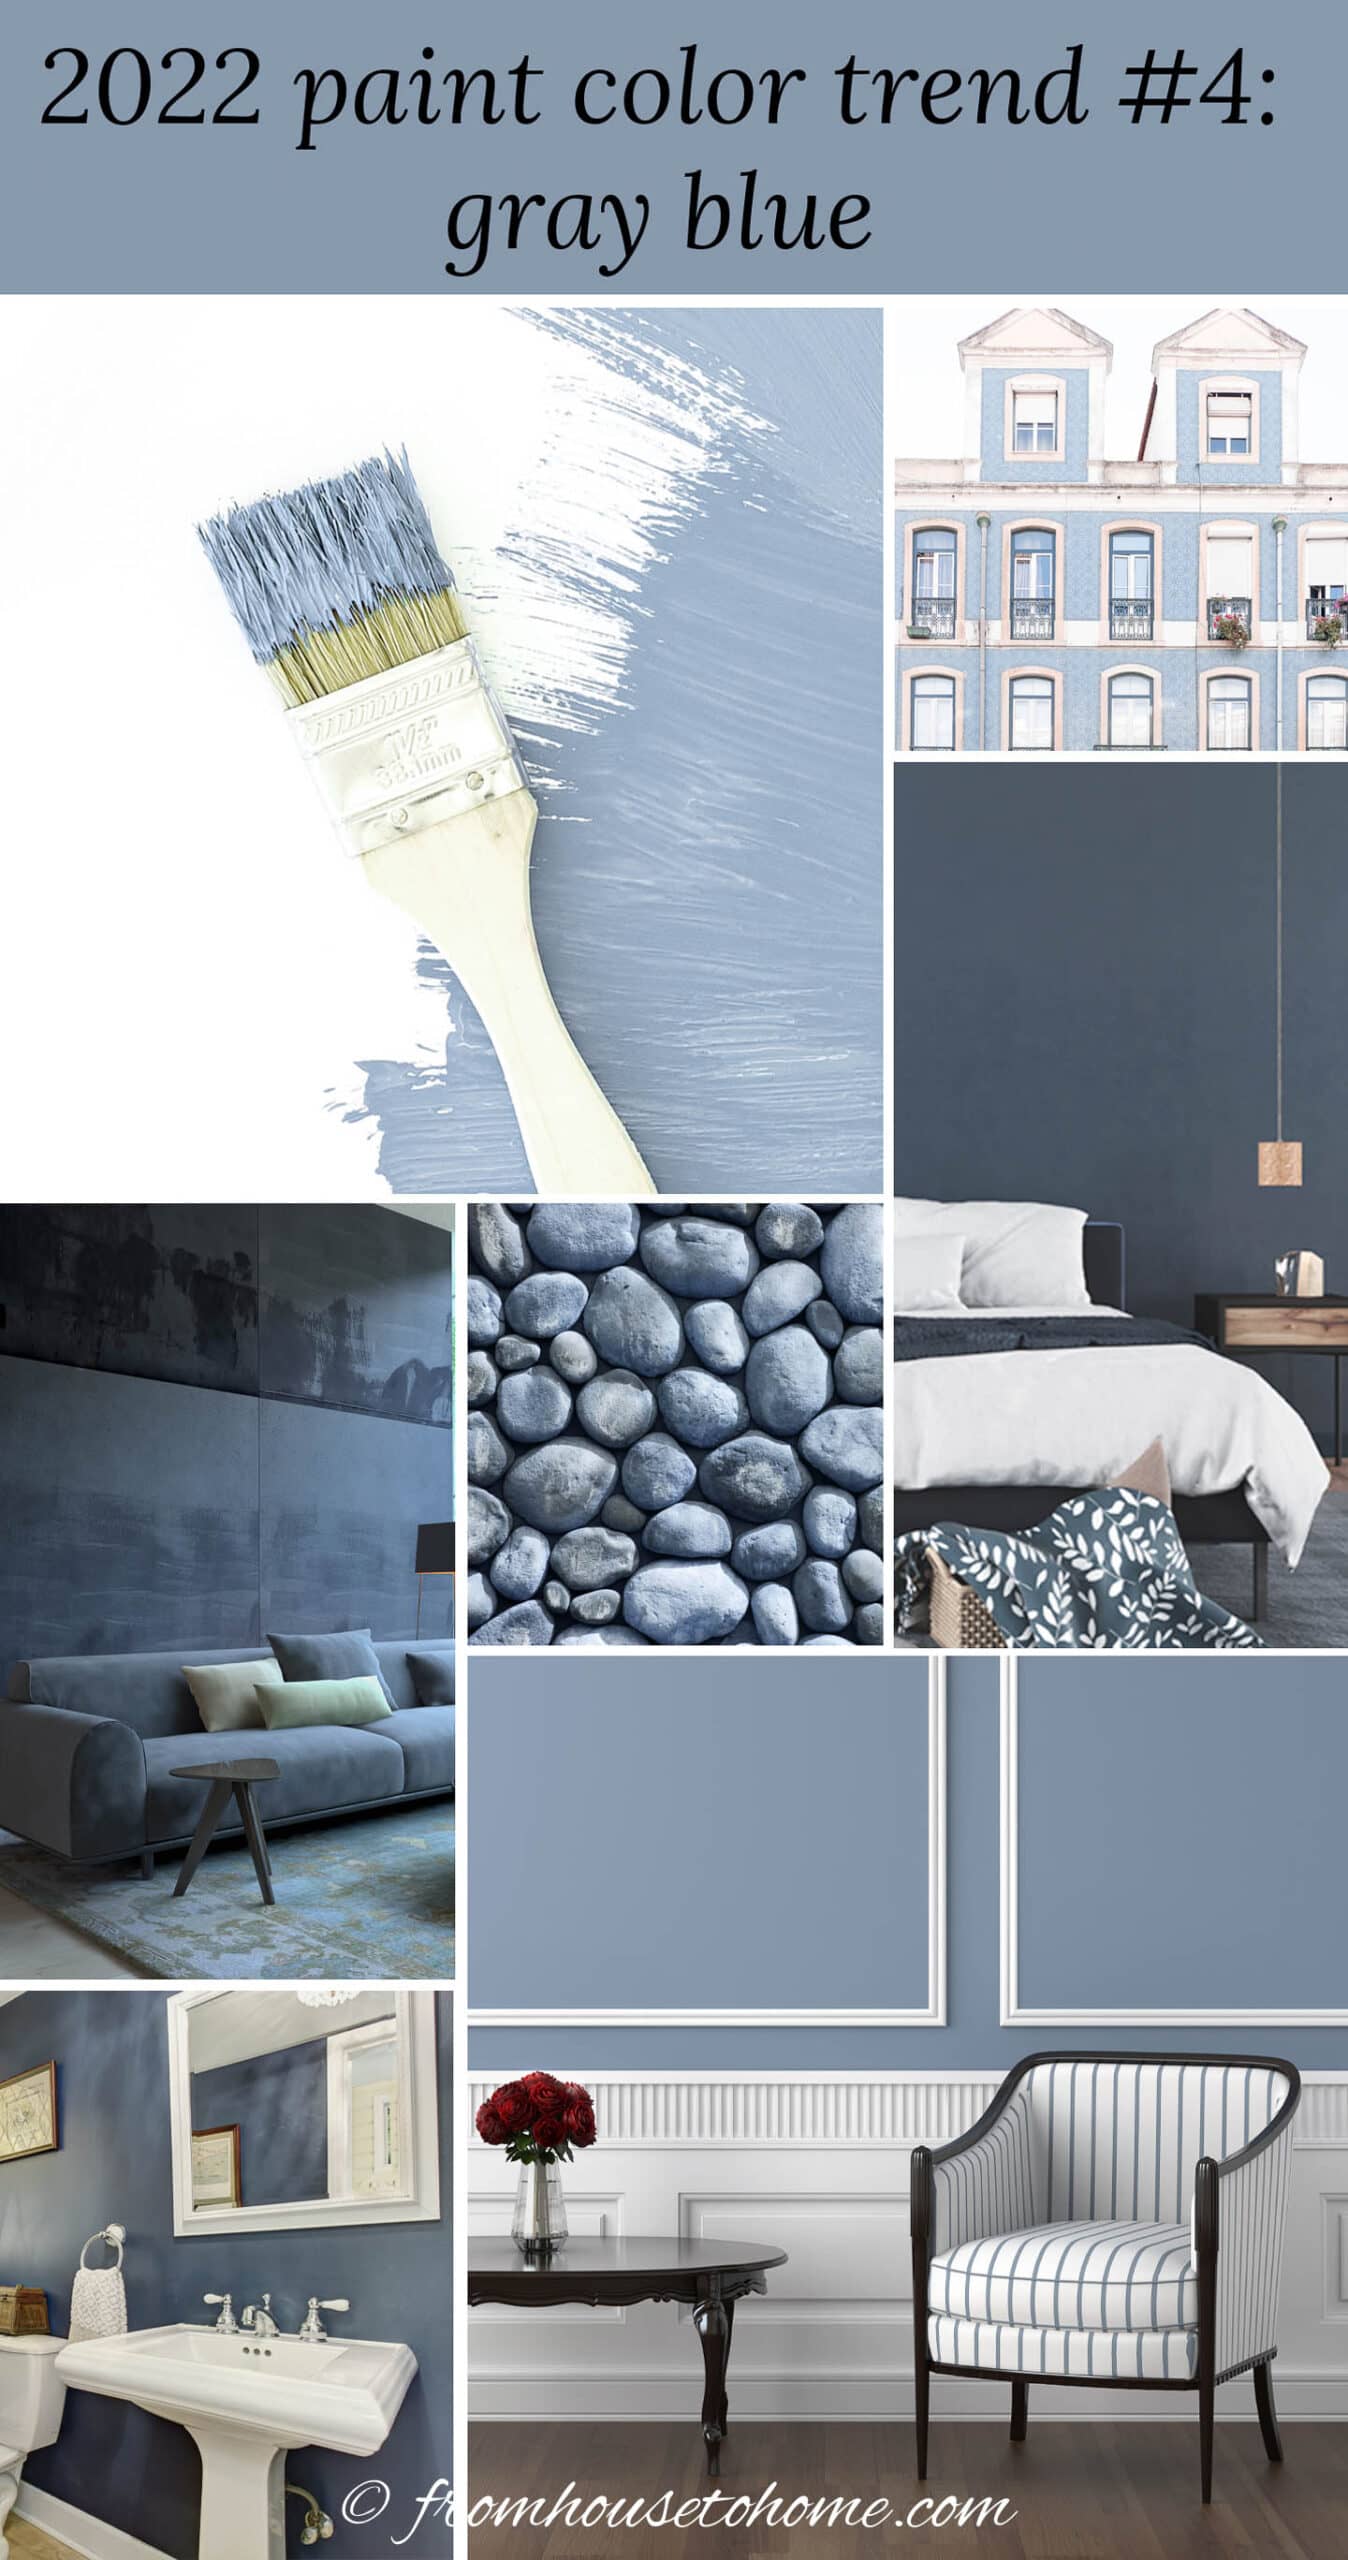 gray blue colors including a paint brush, a building painted in gray blue, a bedroom wall painted a dark gray blue, gray blue rocks, a living with a gray blue sofa and wall, a bathroom with gray blue walls and a sitting area decorated in gray blue and white